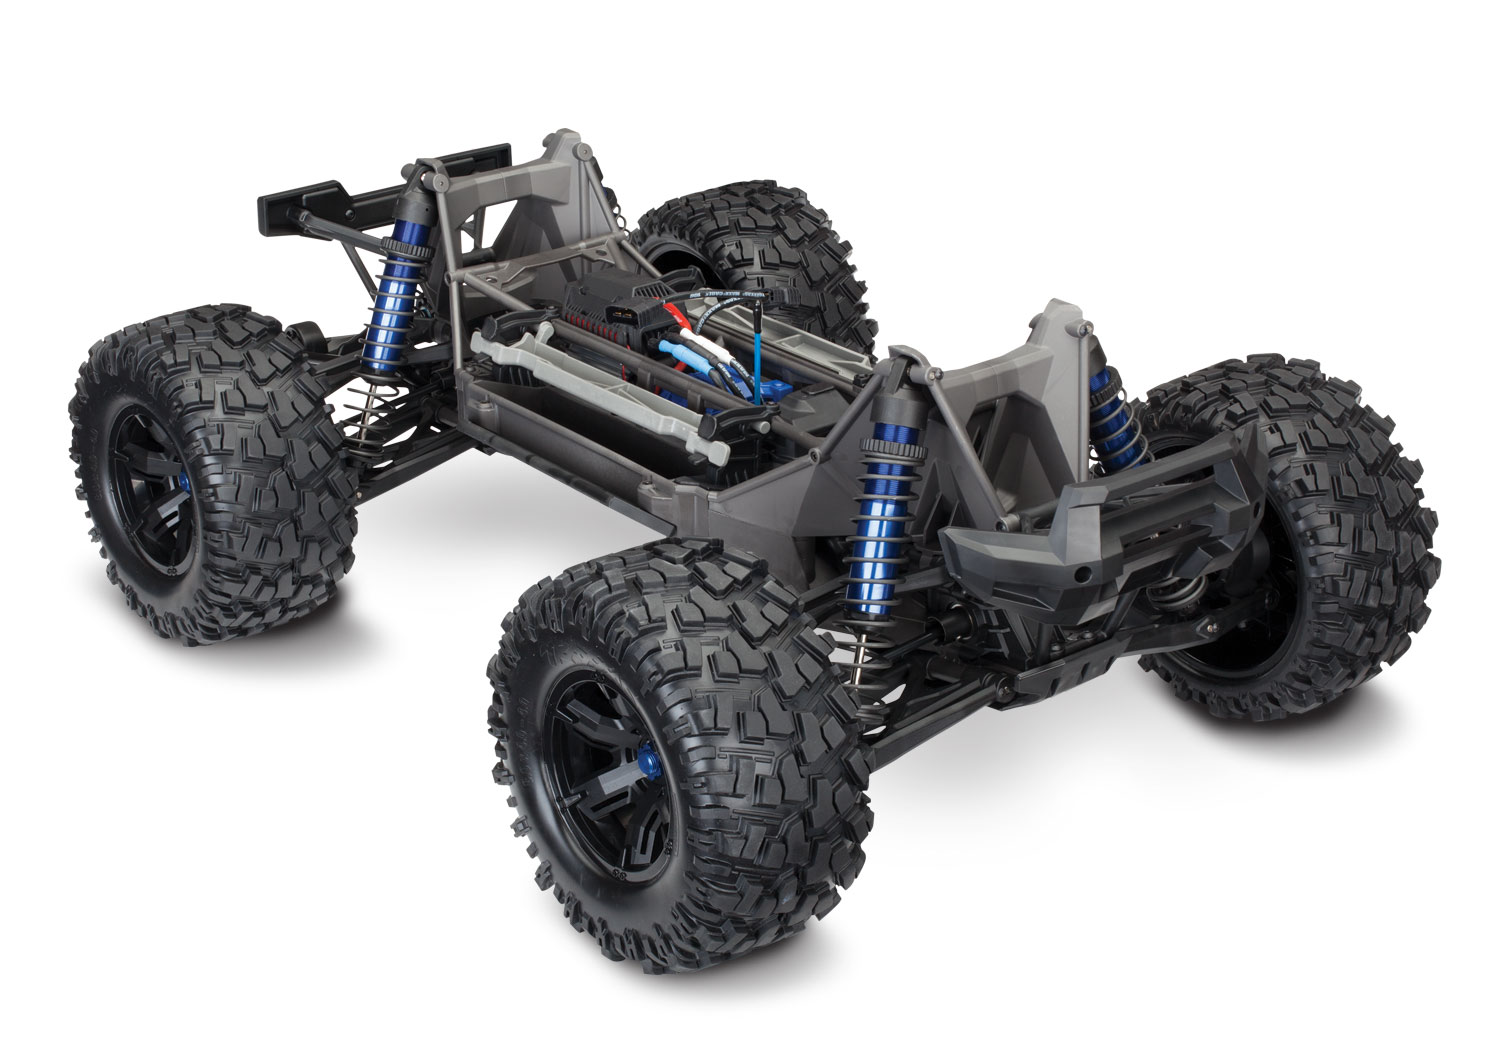 traxxas-77086-4-RnR-3-X-MAXX-4wd-8s-Brushless-Pick-Up-Truck-the-evolution-of-tough-Monstermachine